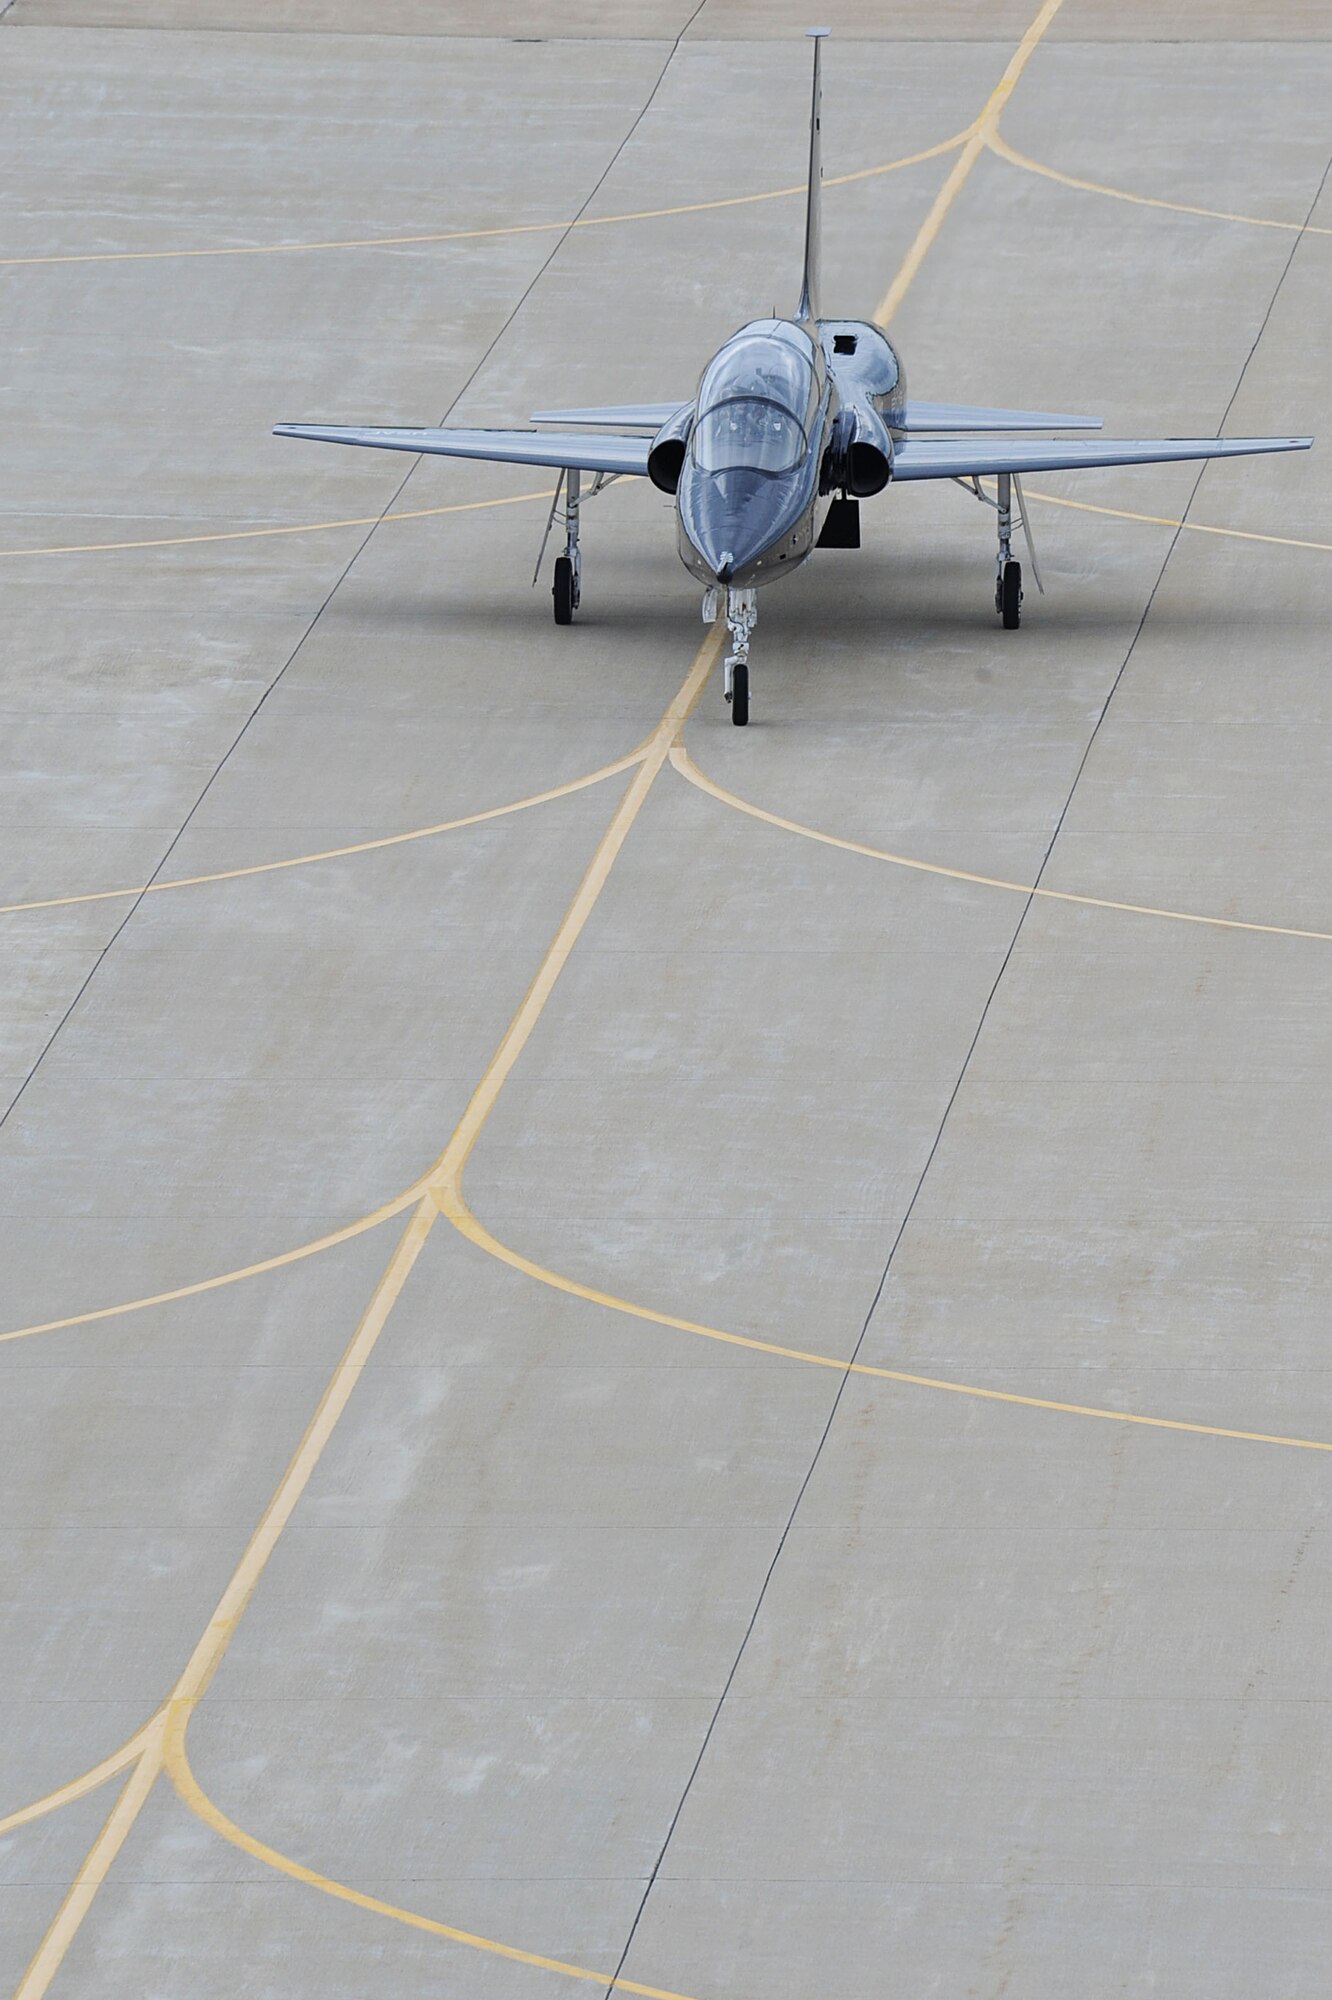 A T-38 Talon arrives at Langley AFB, Va., April 1, 2011  from Holloman Air Force Base, N.M.. The aircraft, flown by Col. Kevin Mastin, 1st Fighter Wing vice commander, is temporarily assigned to the 1st Fighter Wing to support combat readiness training for the pilots. (U.S. Air Force photo by Senior Airman Brian Ybarbo/Released)
